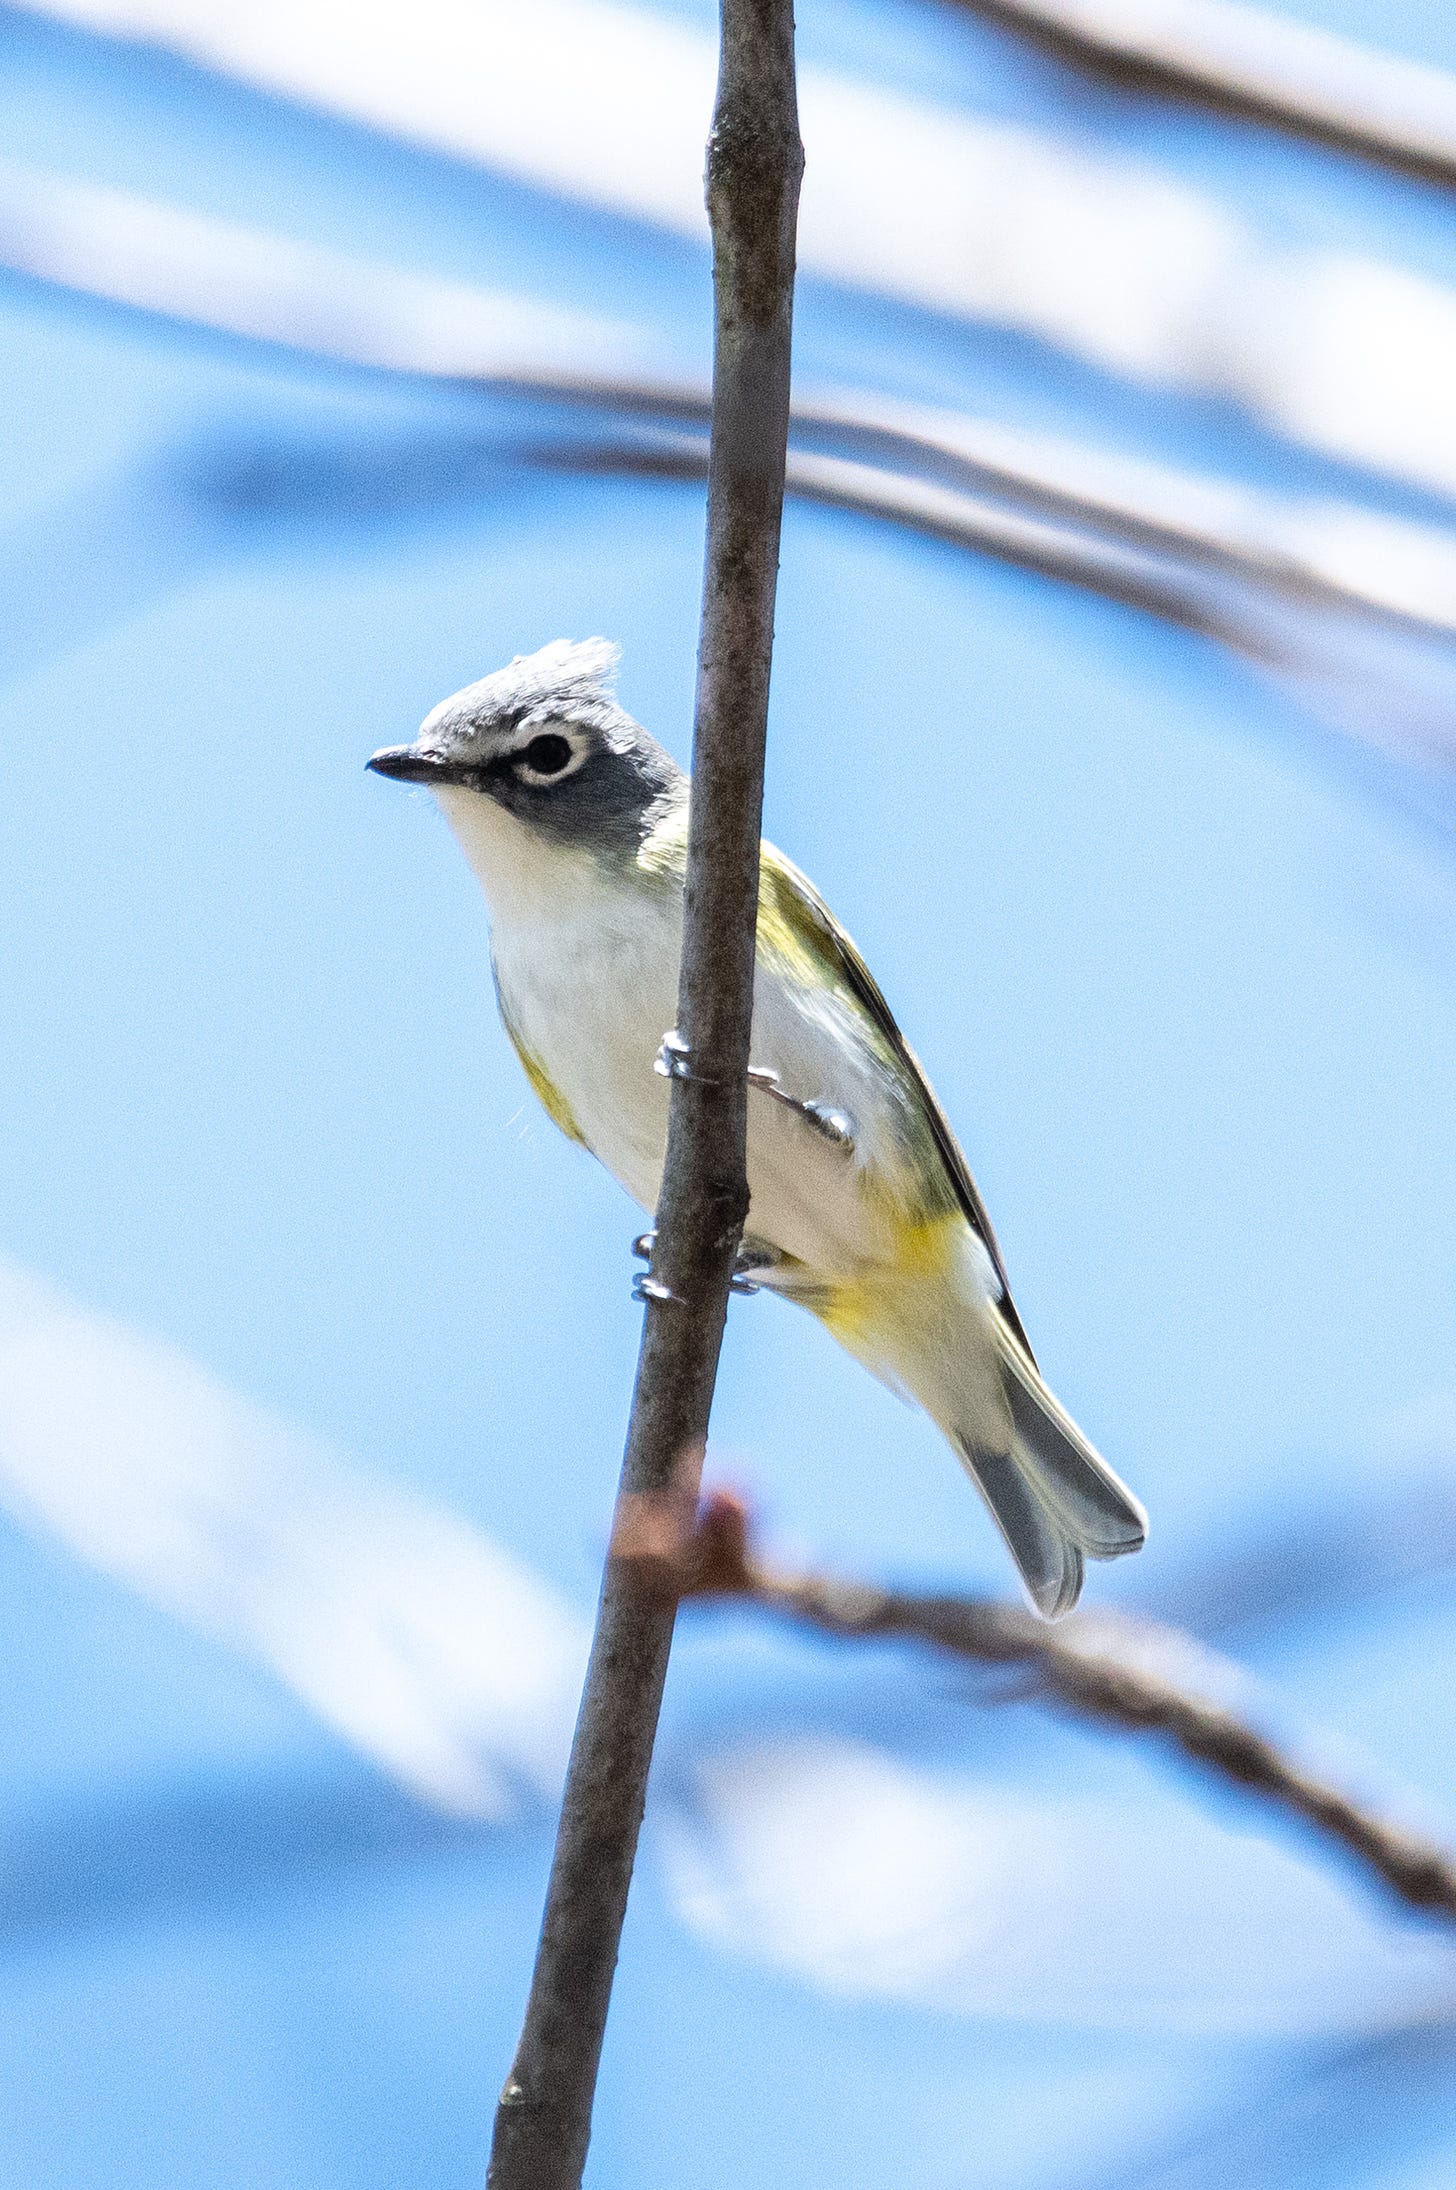 A sharp-looking blue-headed vireo, clinging to a vertical branch, somewhat backlit